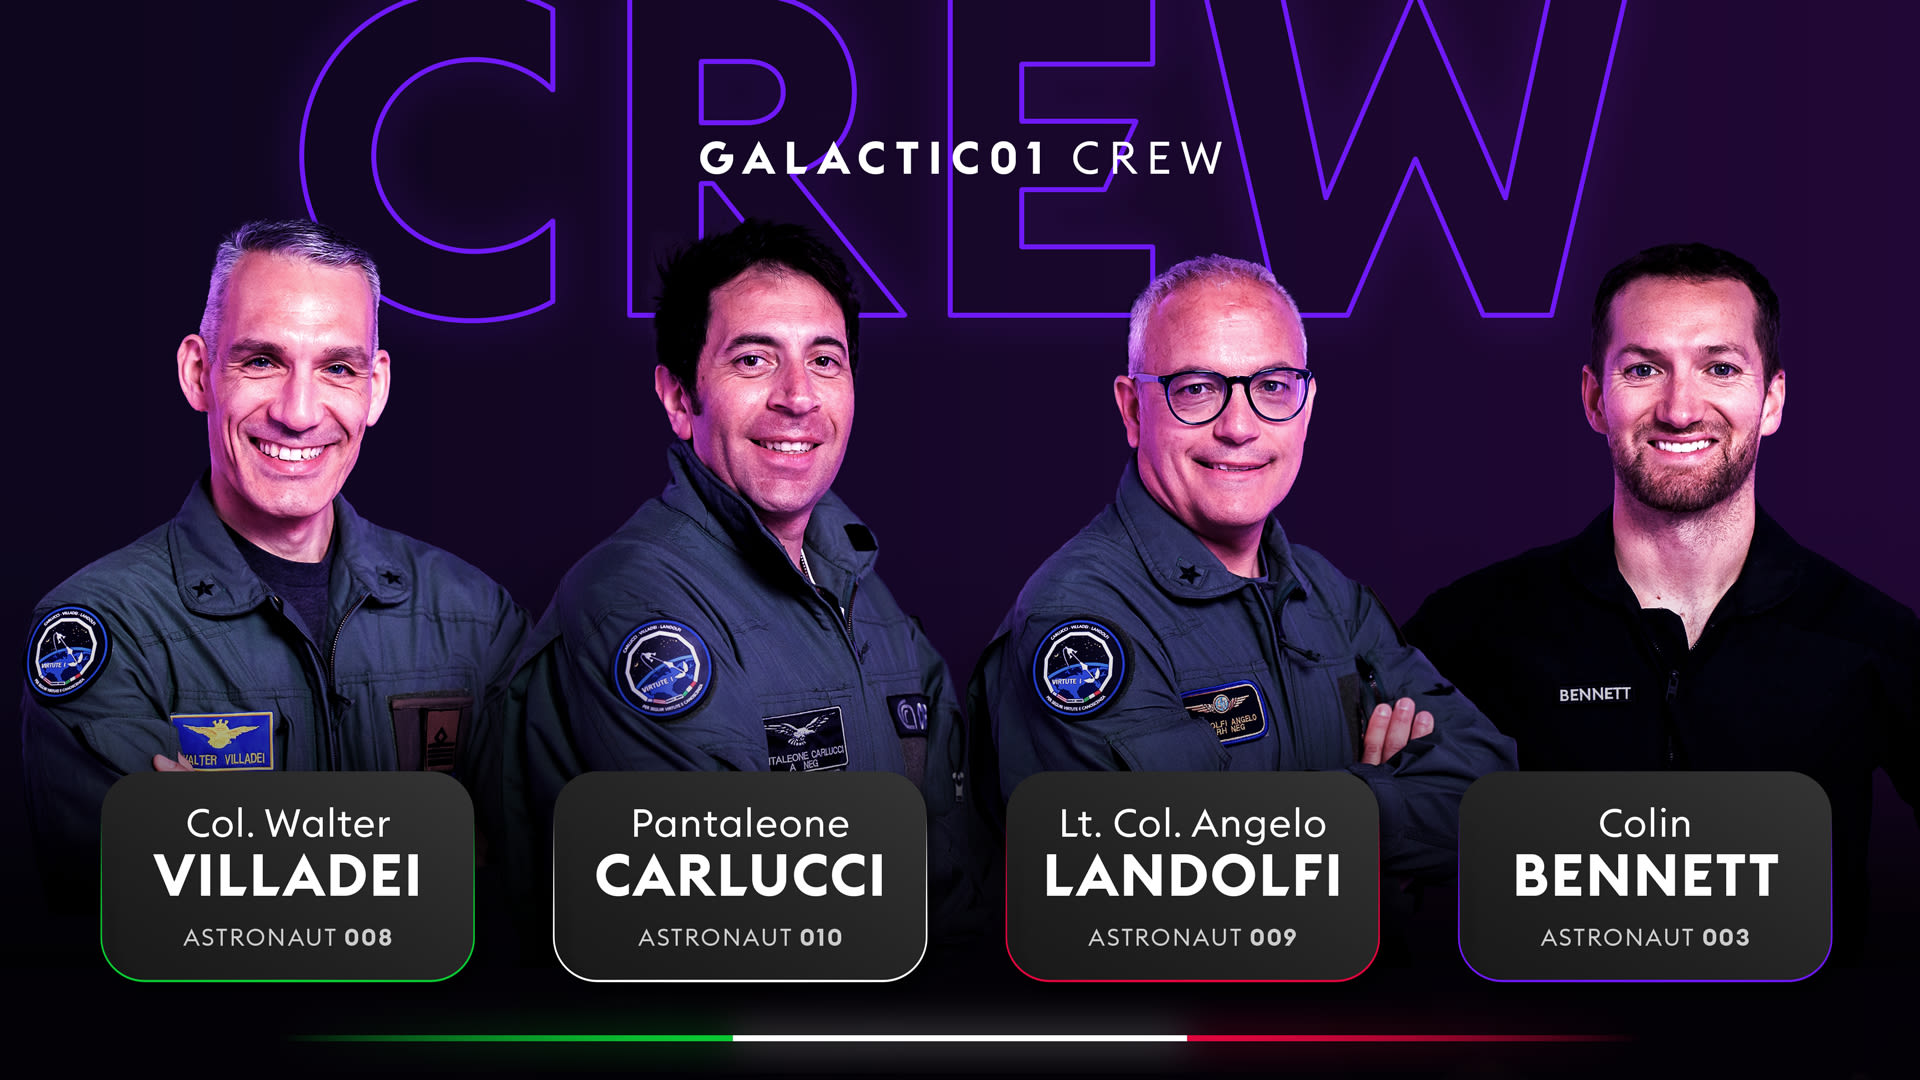 Virgin Galactic's Galactic 01 space mission crew